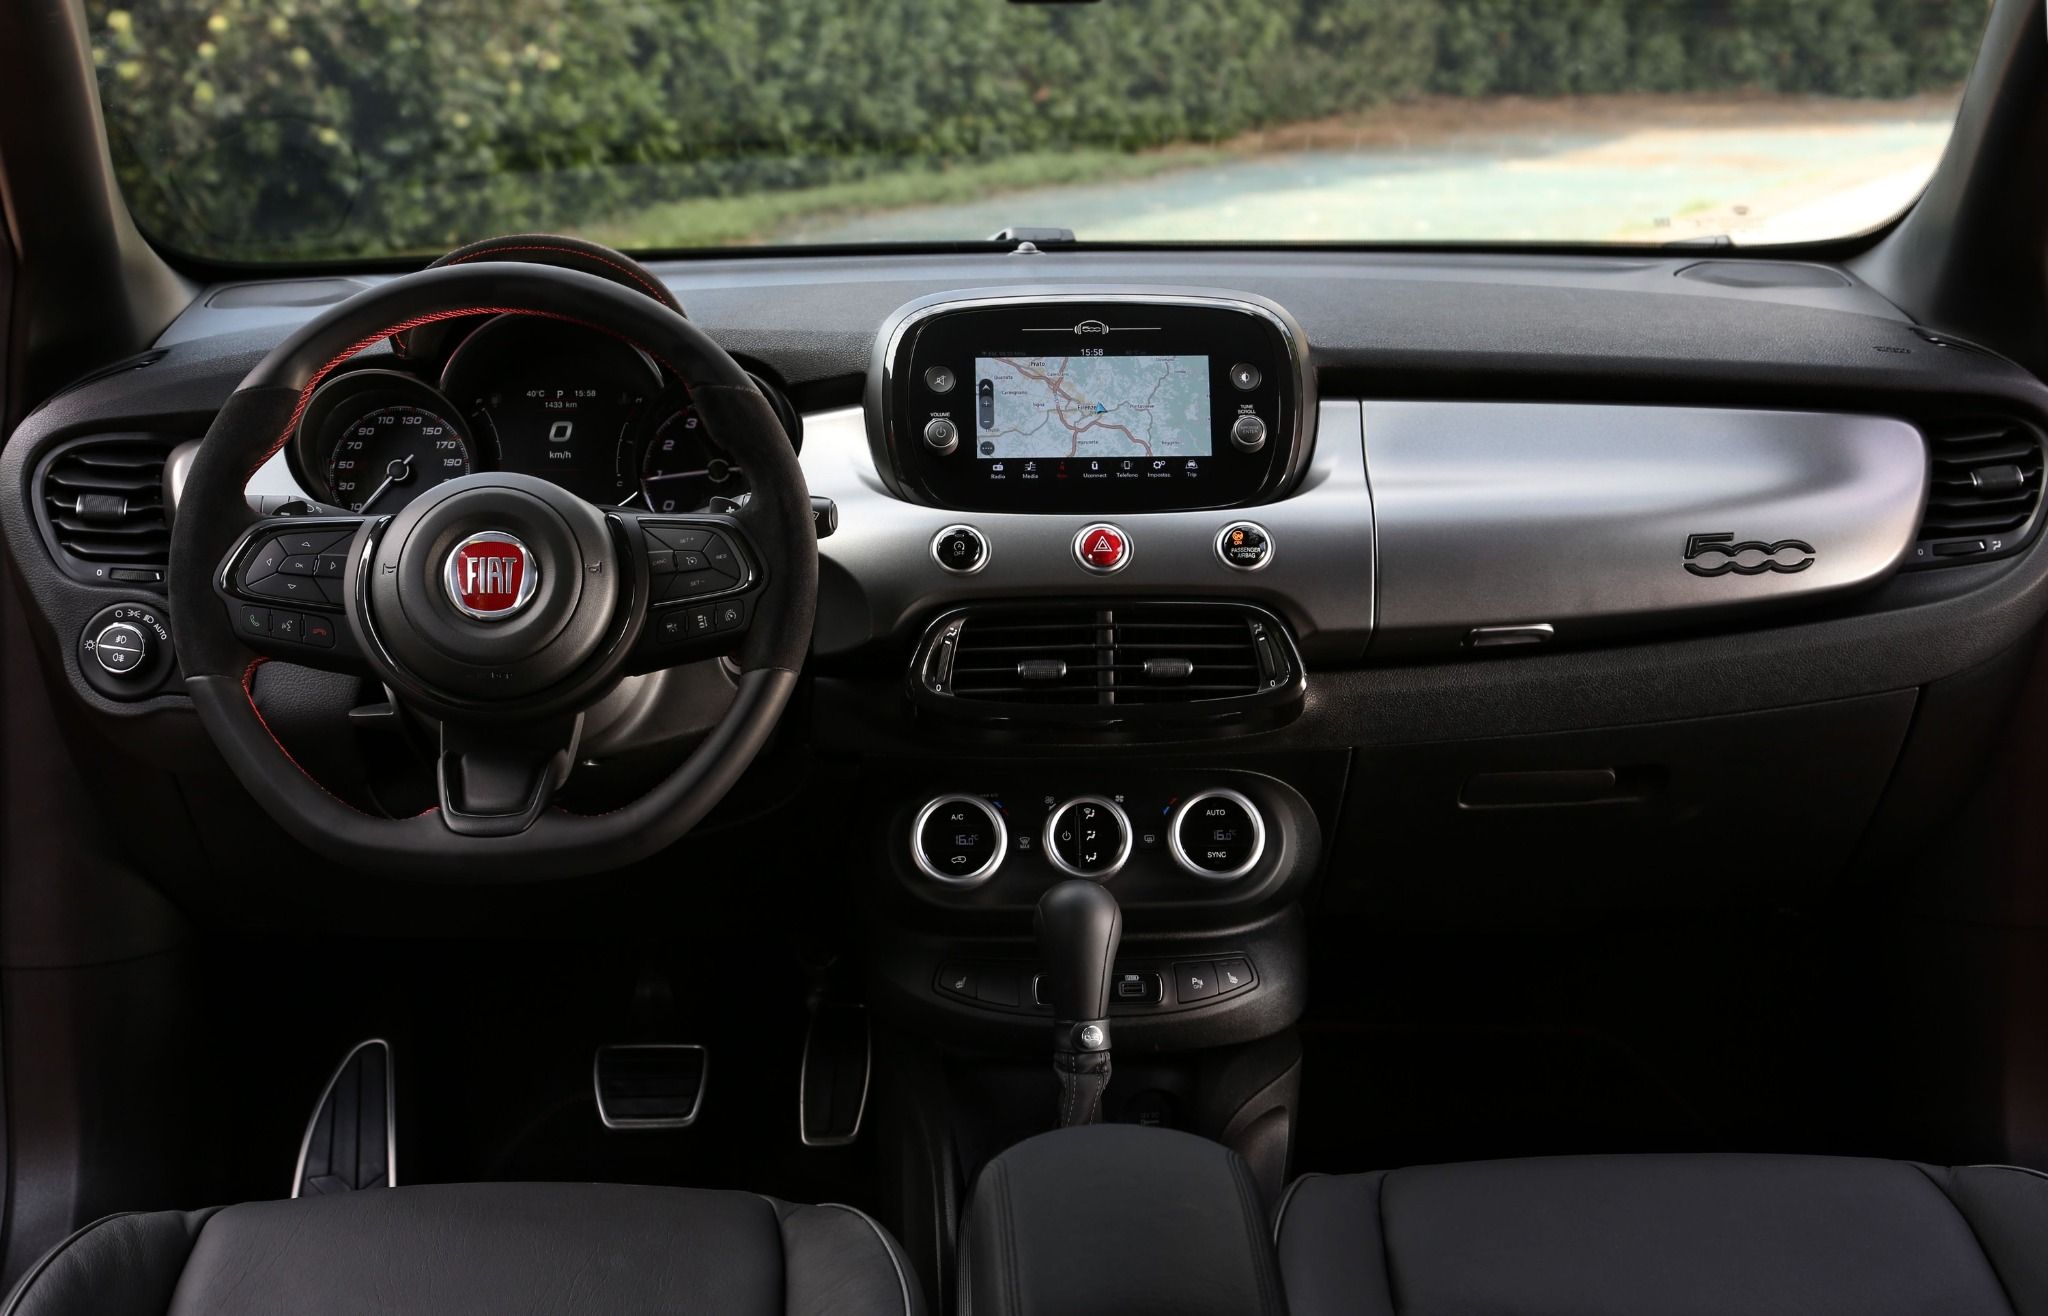 Interior of Fiat 500x Sport driving on a road